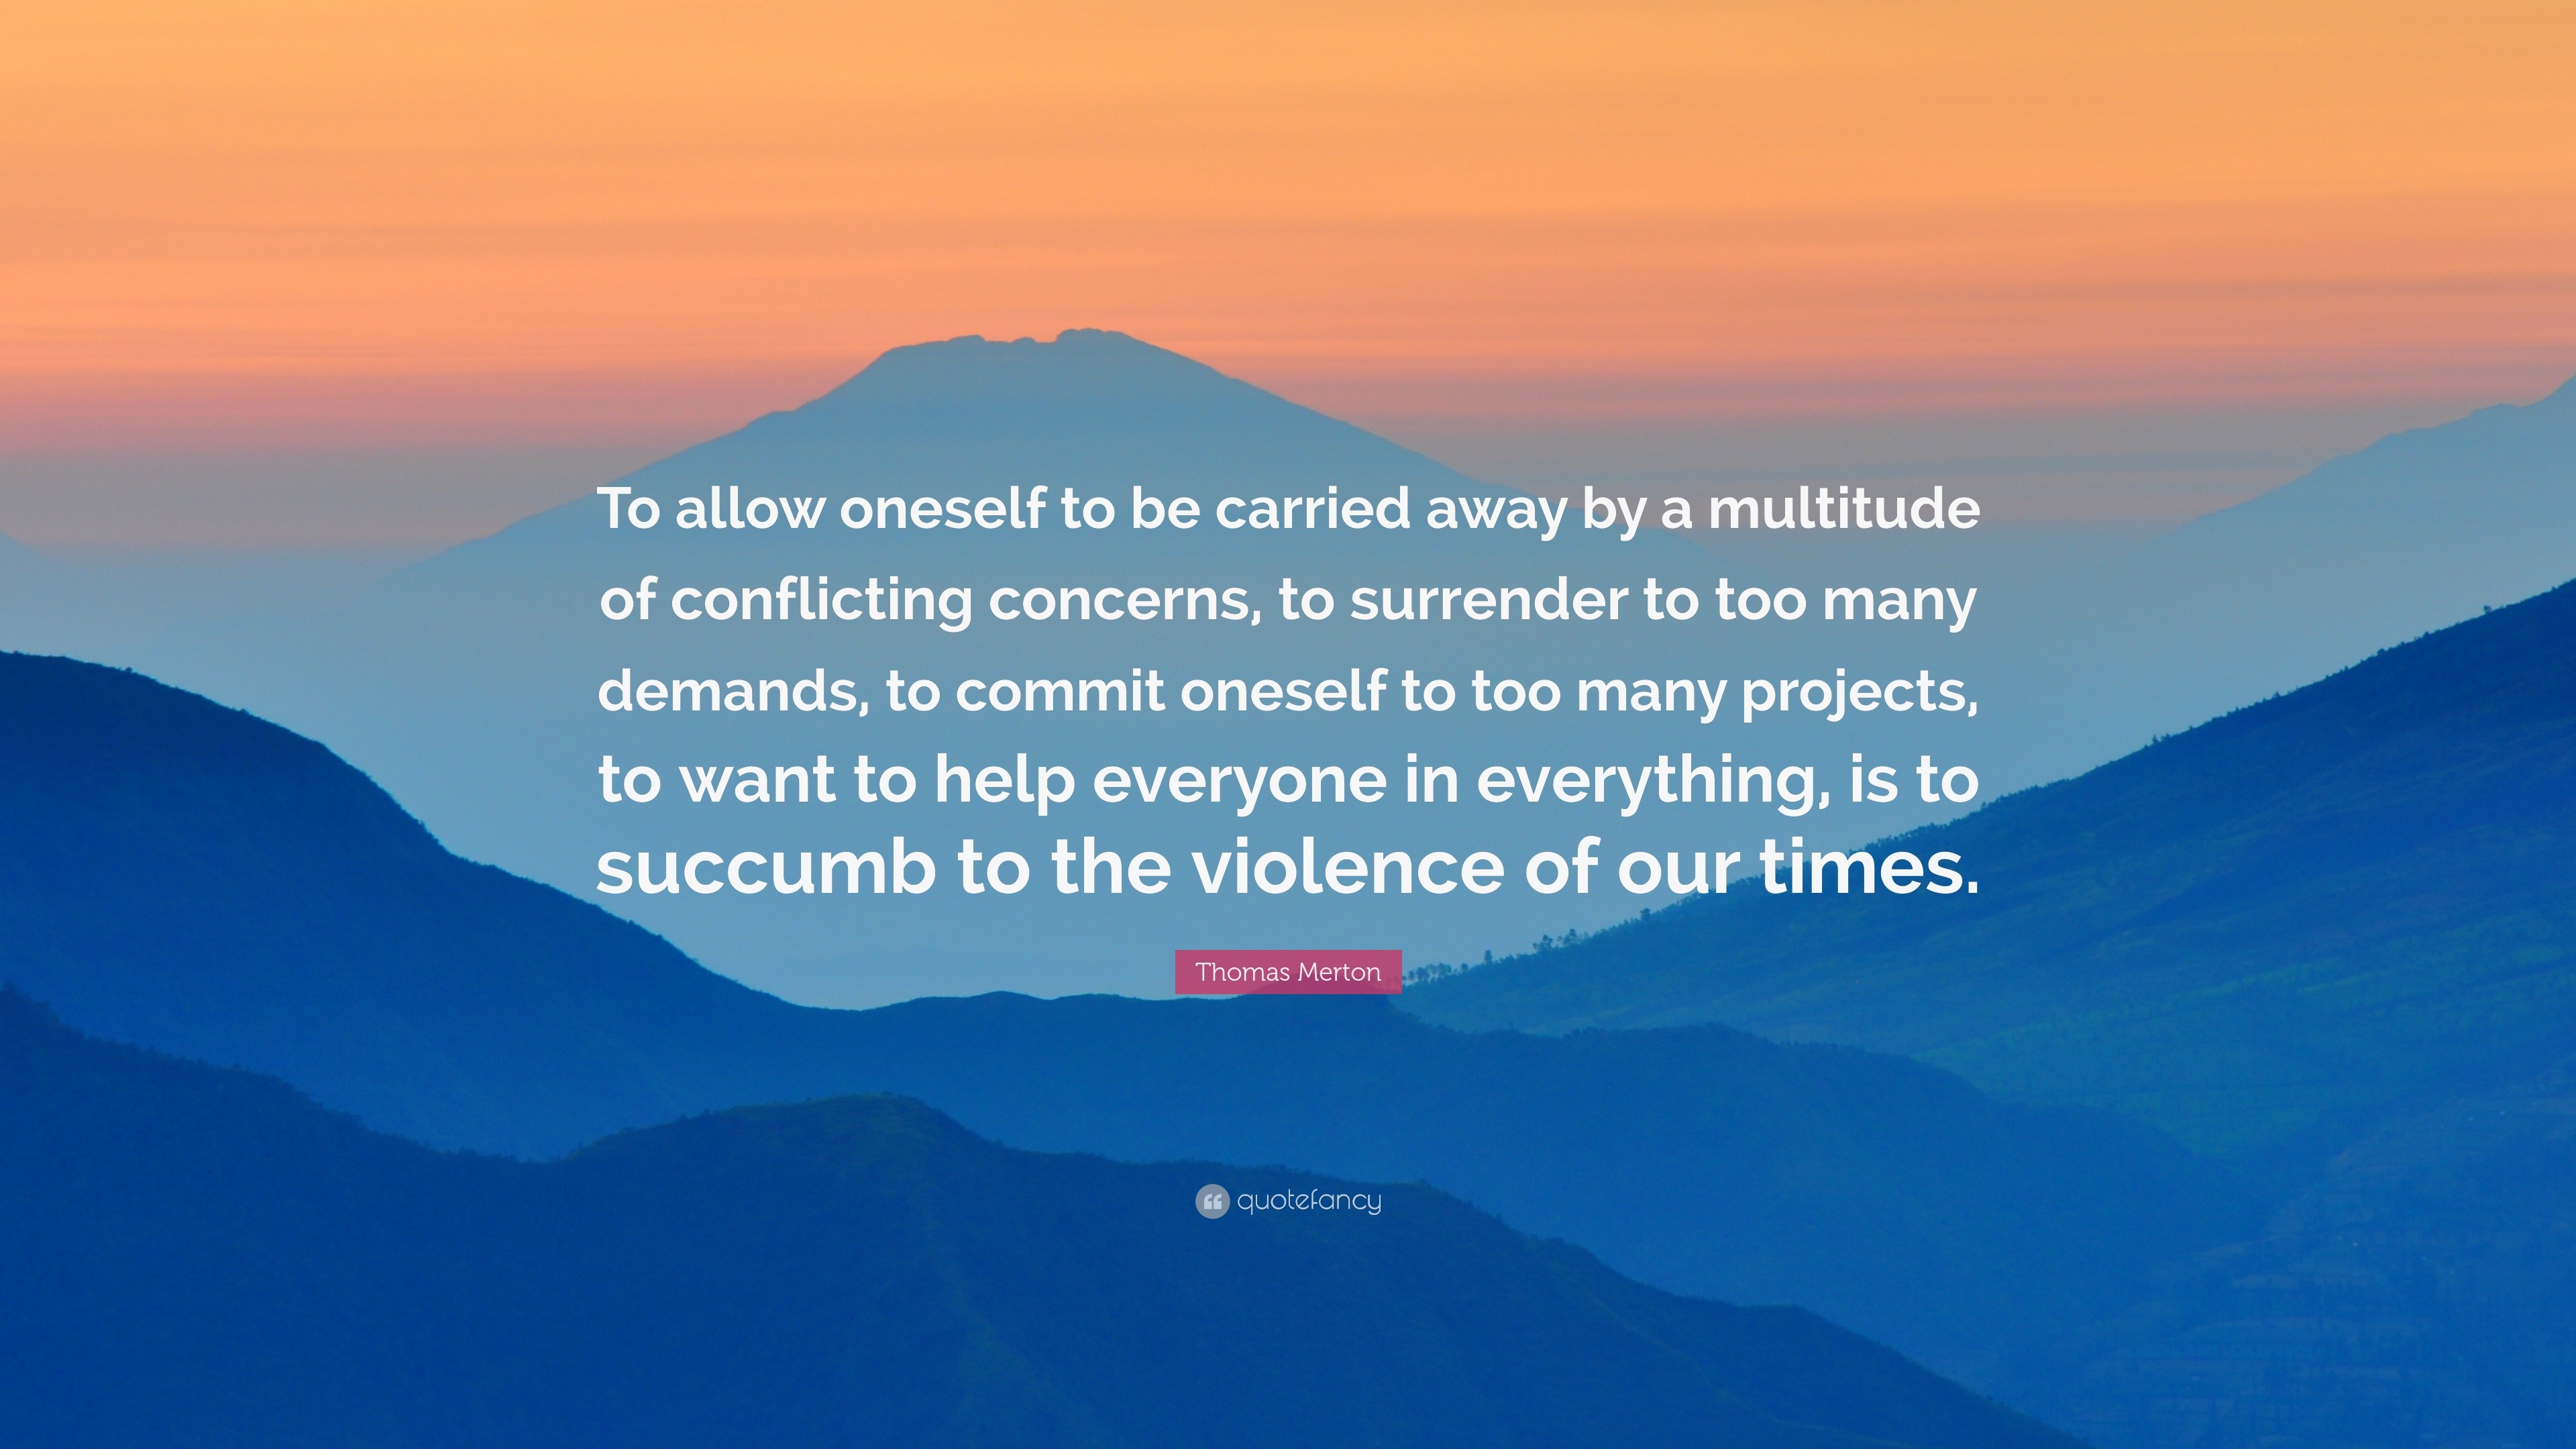 thomas merton quote: "to allow oneself to be carried away by a